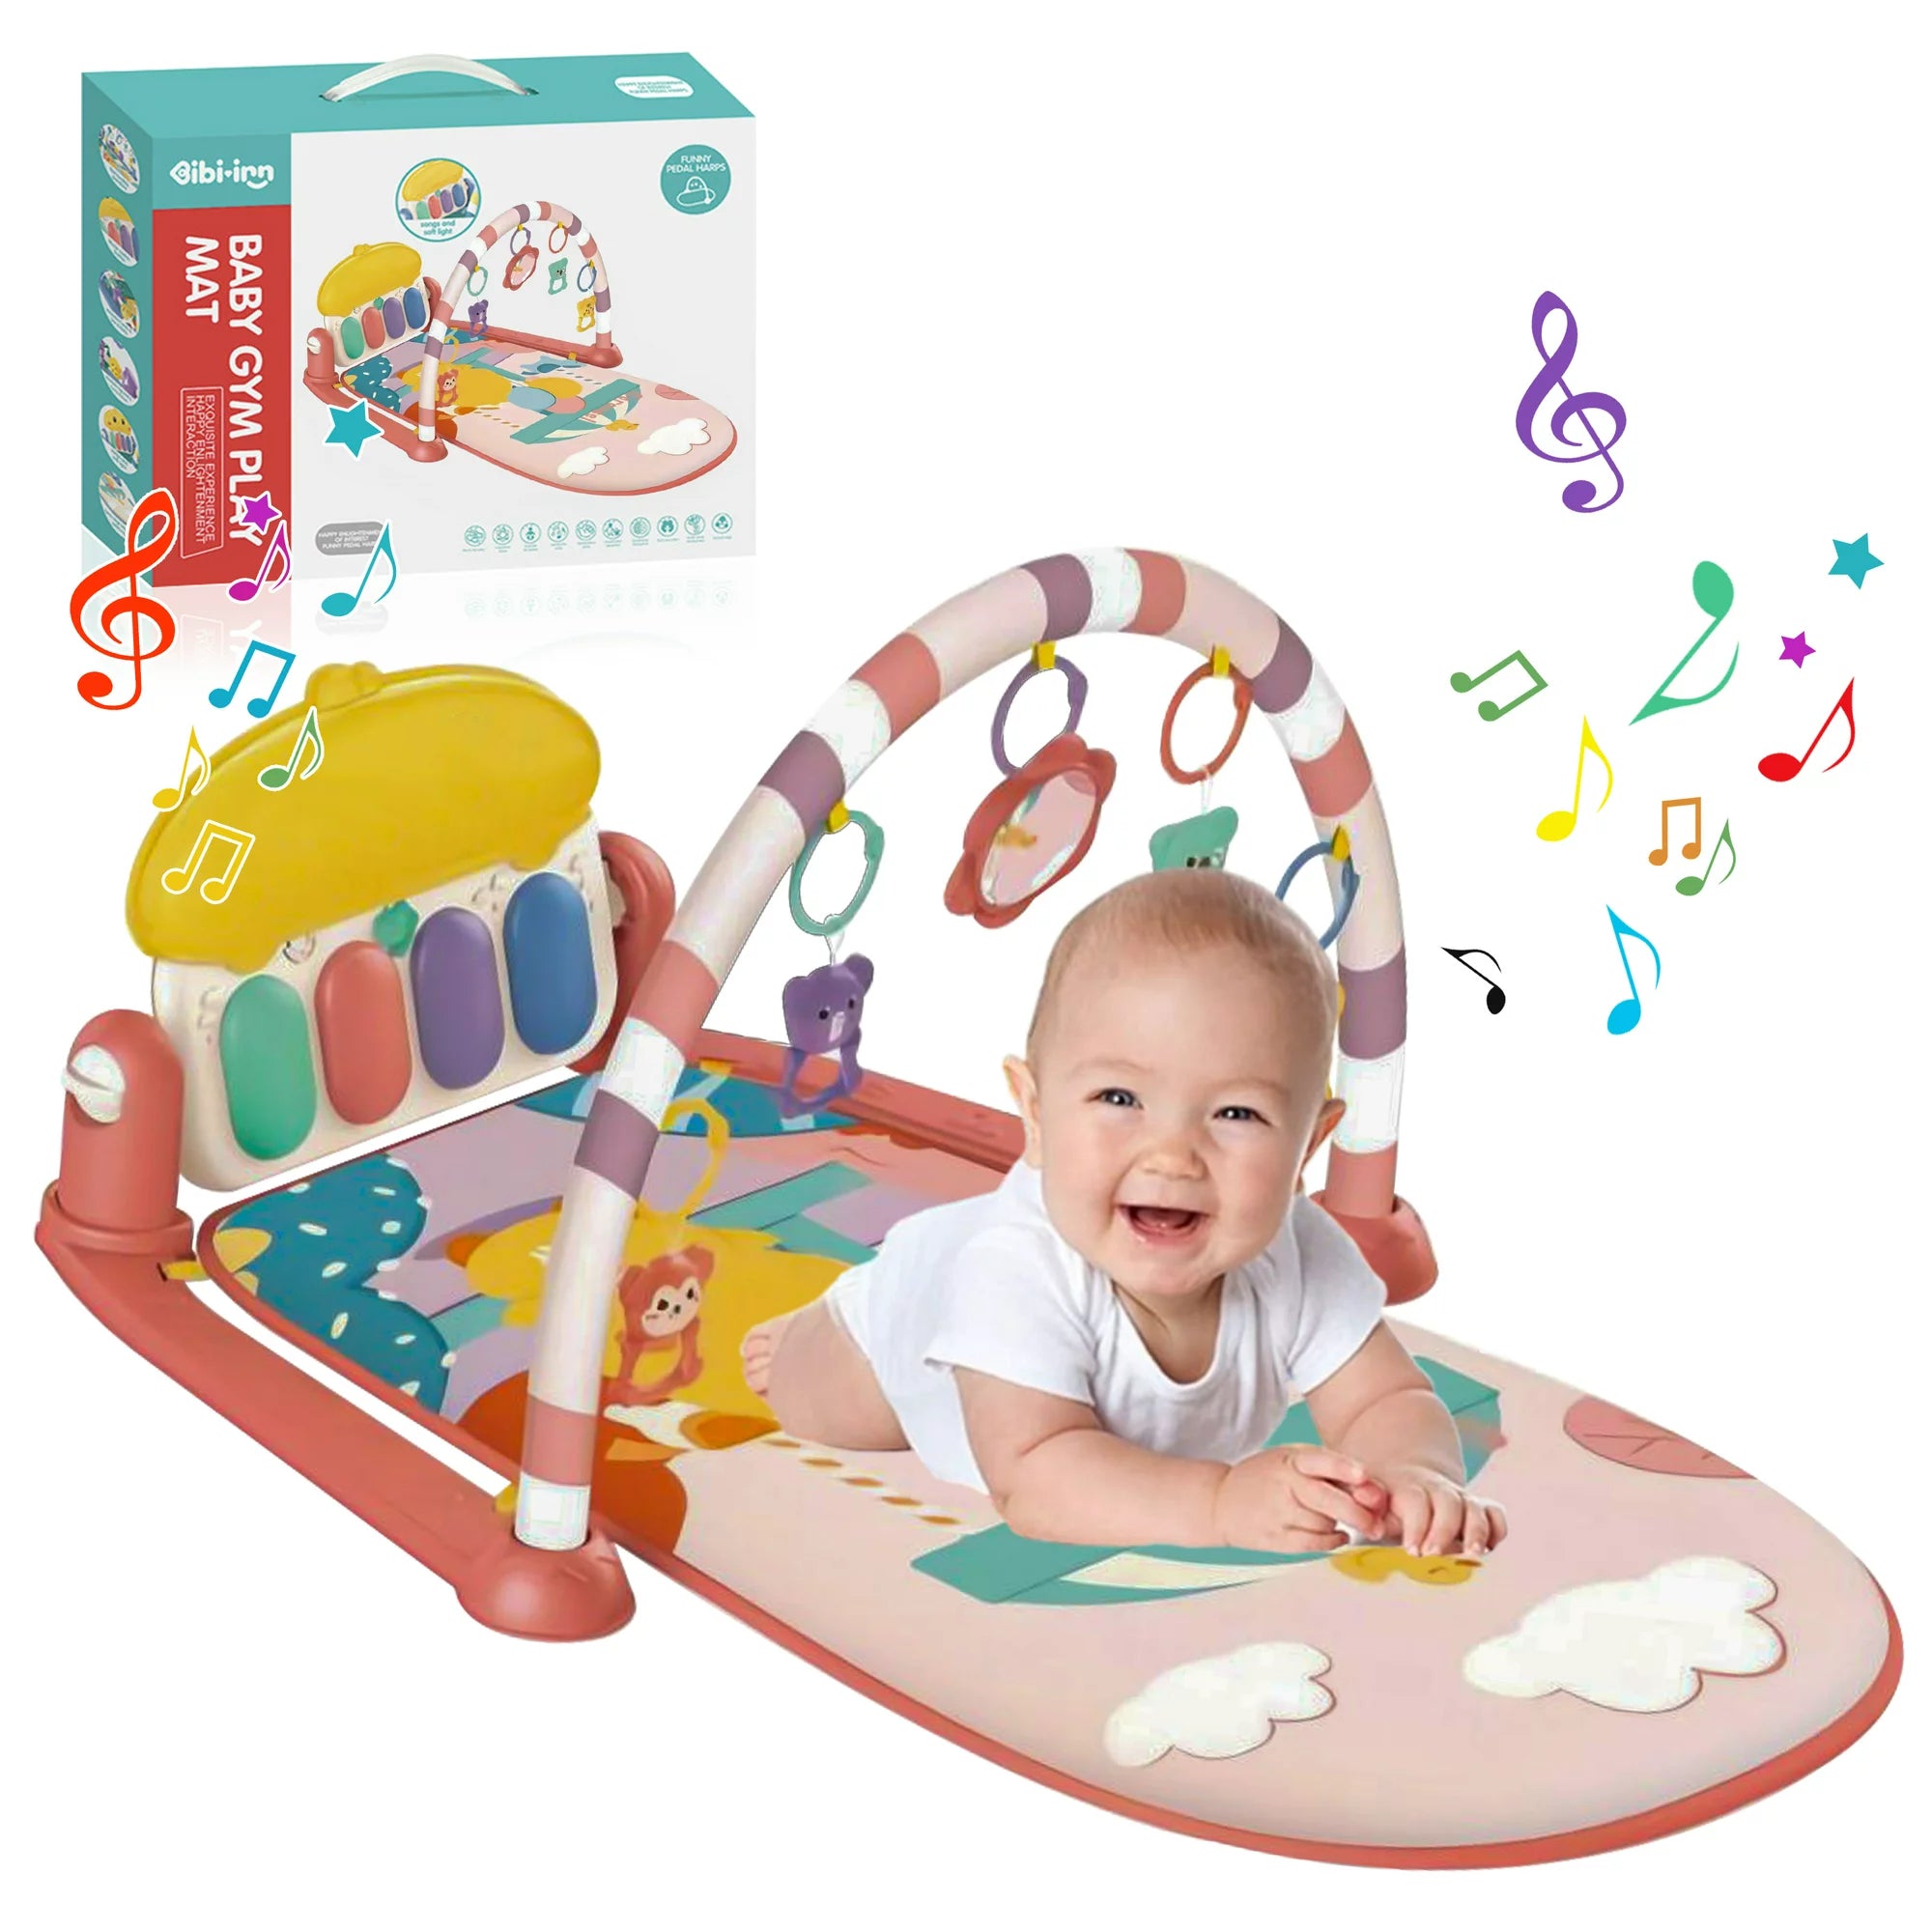 Baby Play Mat With Hanging Toys and Piano,Playmat For Baby,baby Activity Mat,Baby Play Gym,Pink